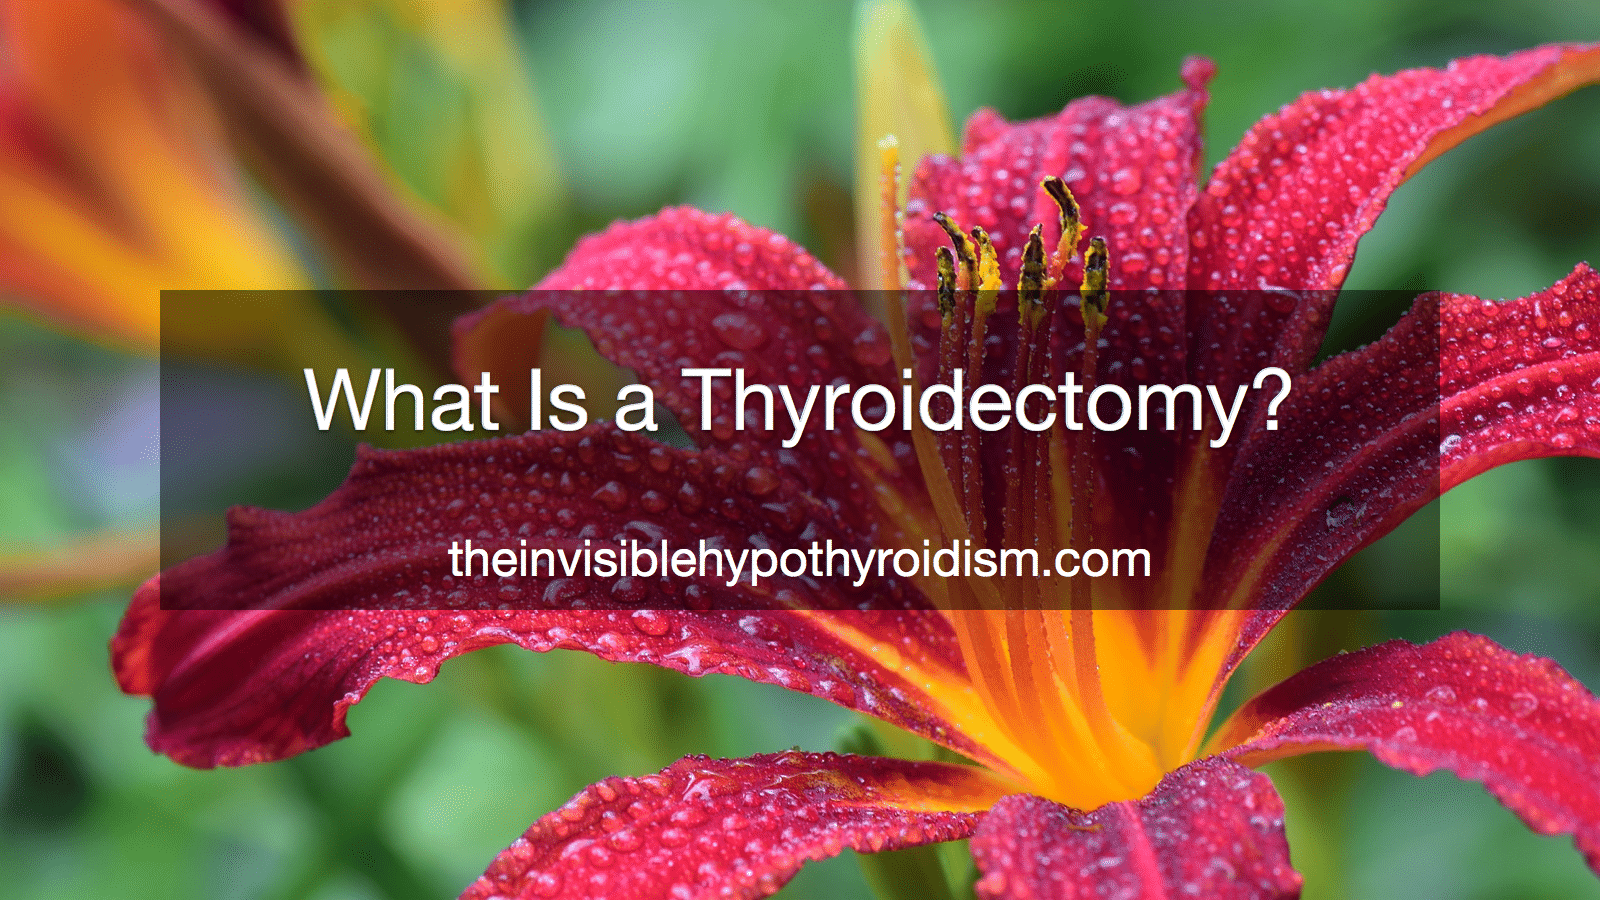 What Is a Thyroidectomy?